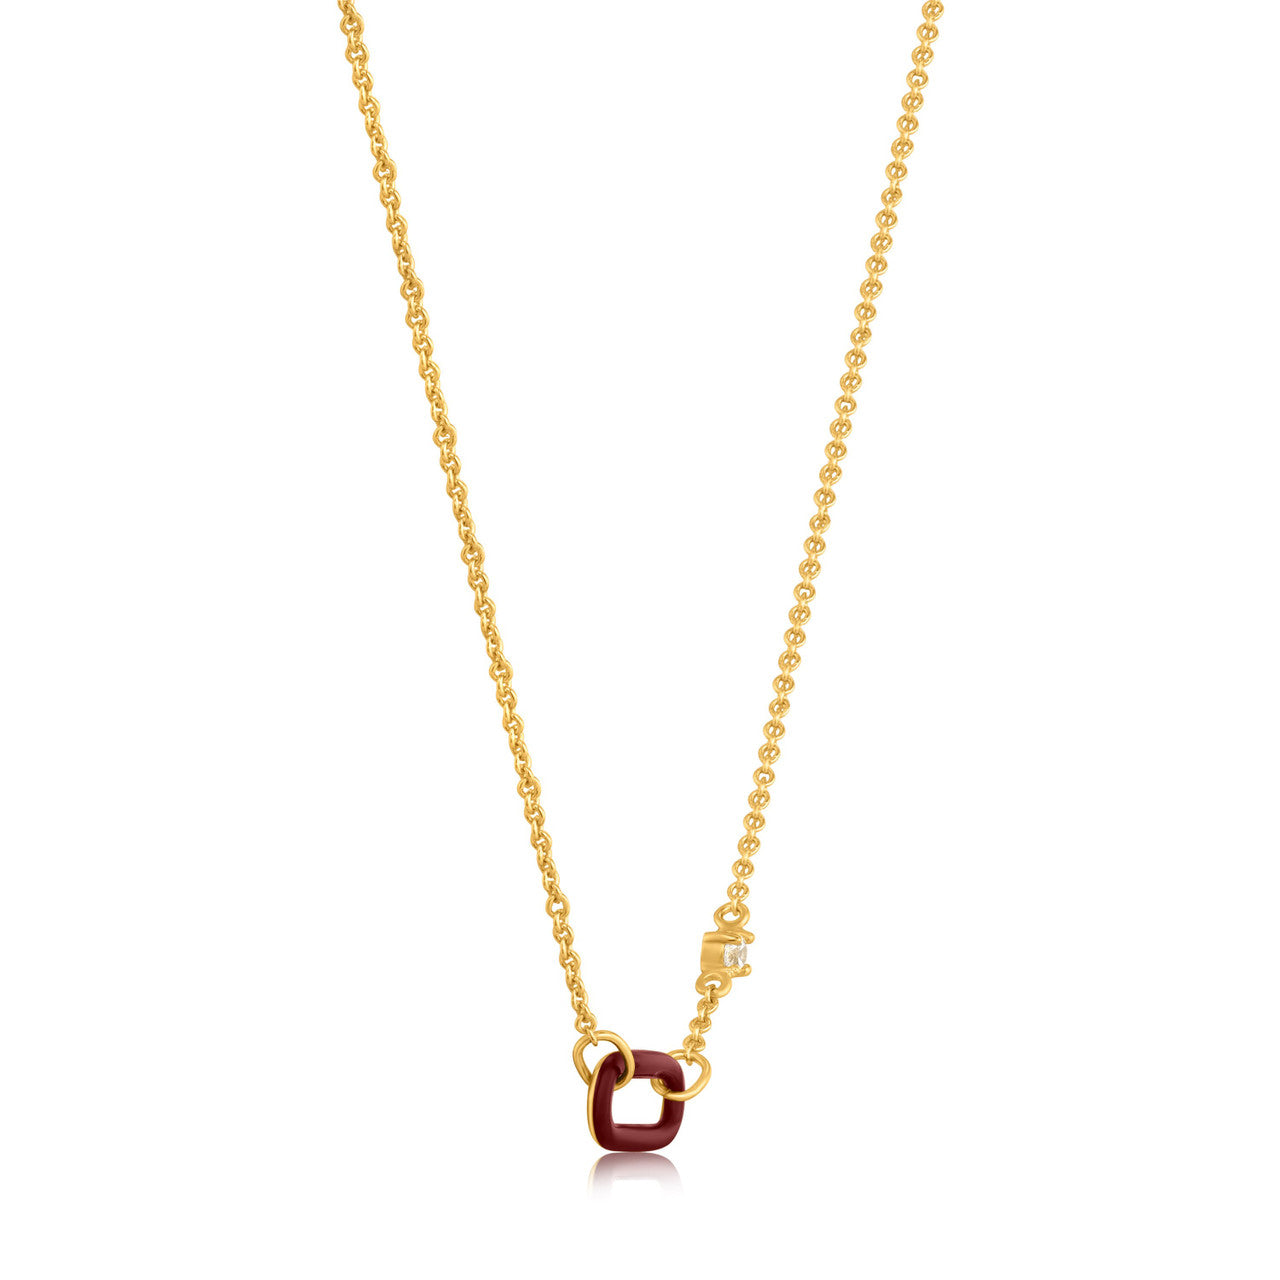 Ania Haie Claret Red Enamel Gold Link Necklace - N031-03G-R | Ice Jewellery Australia